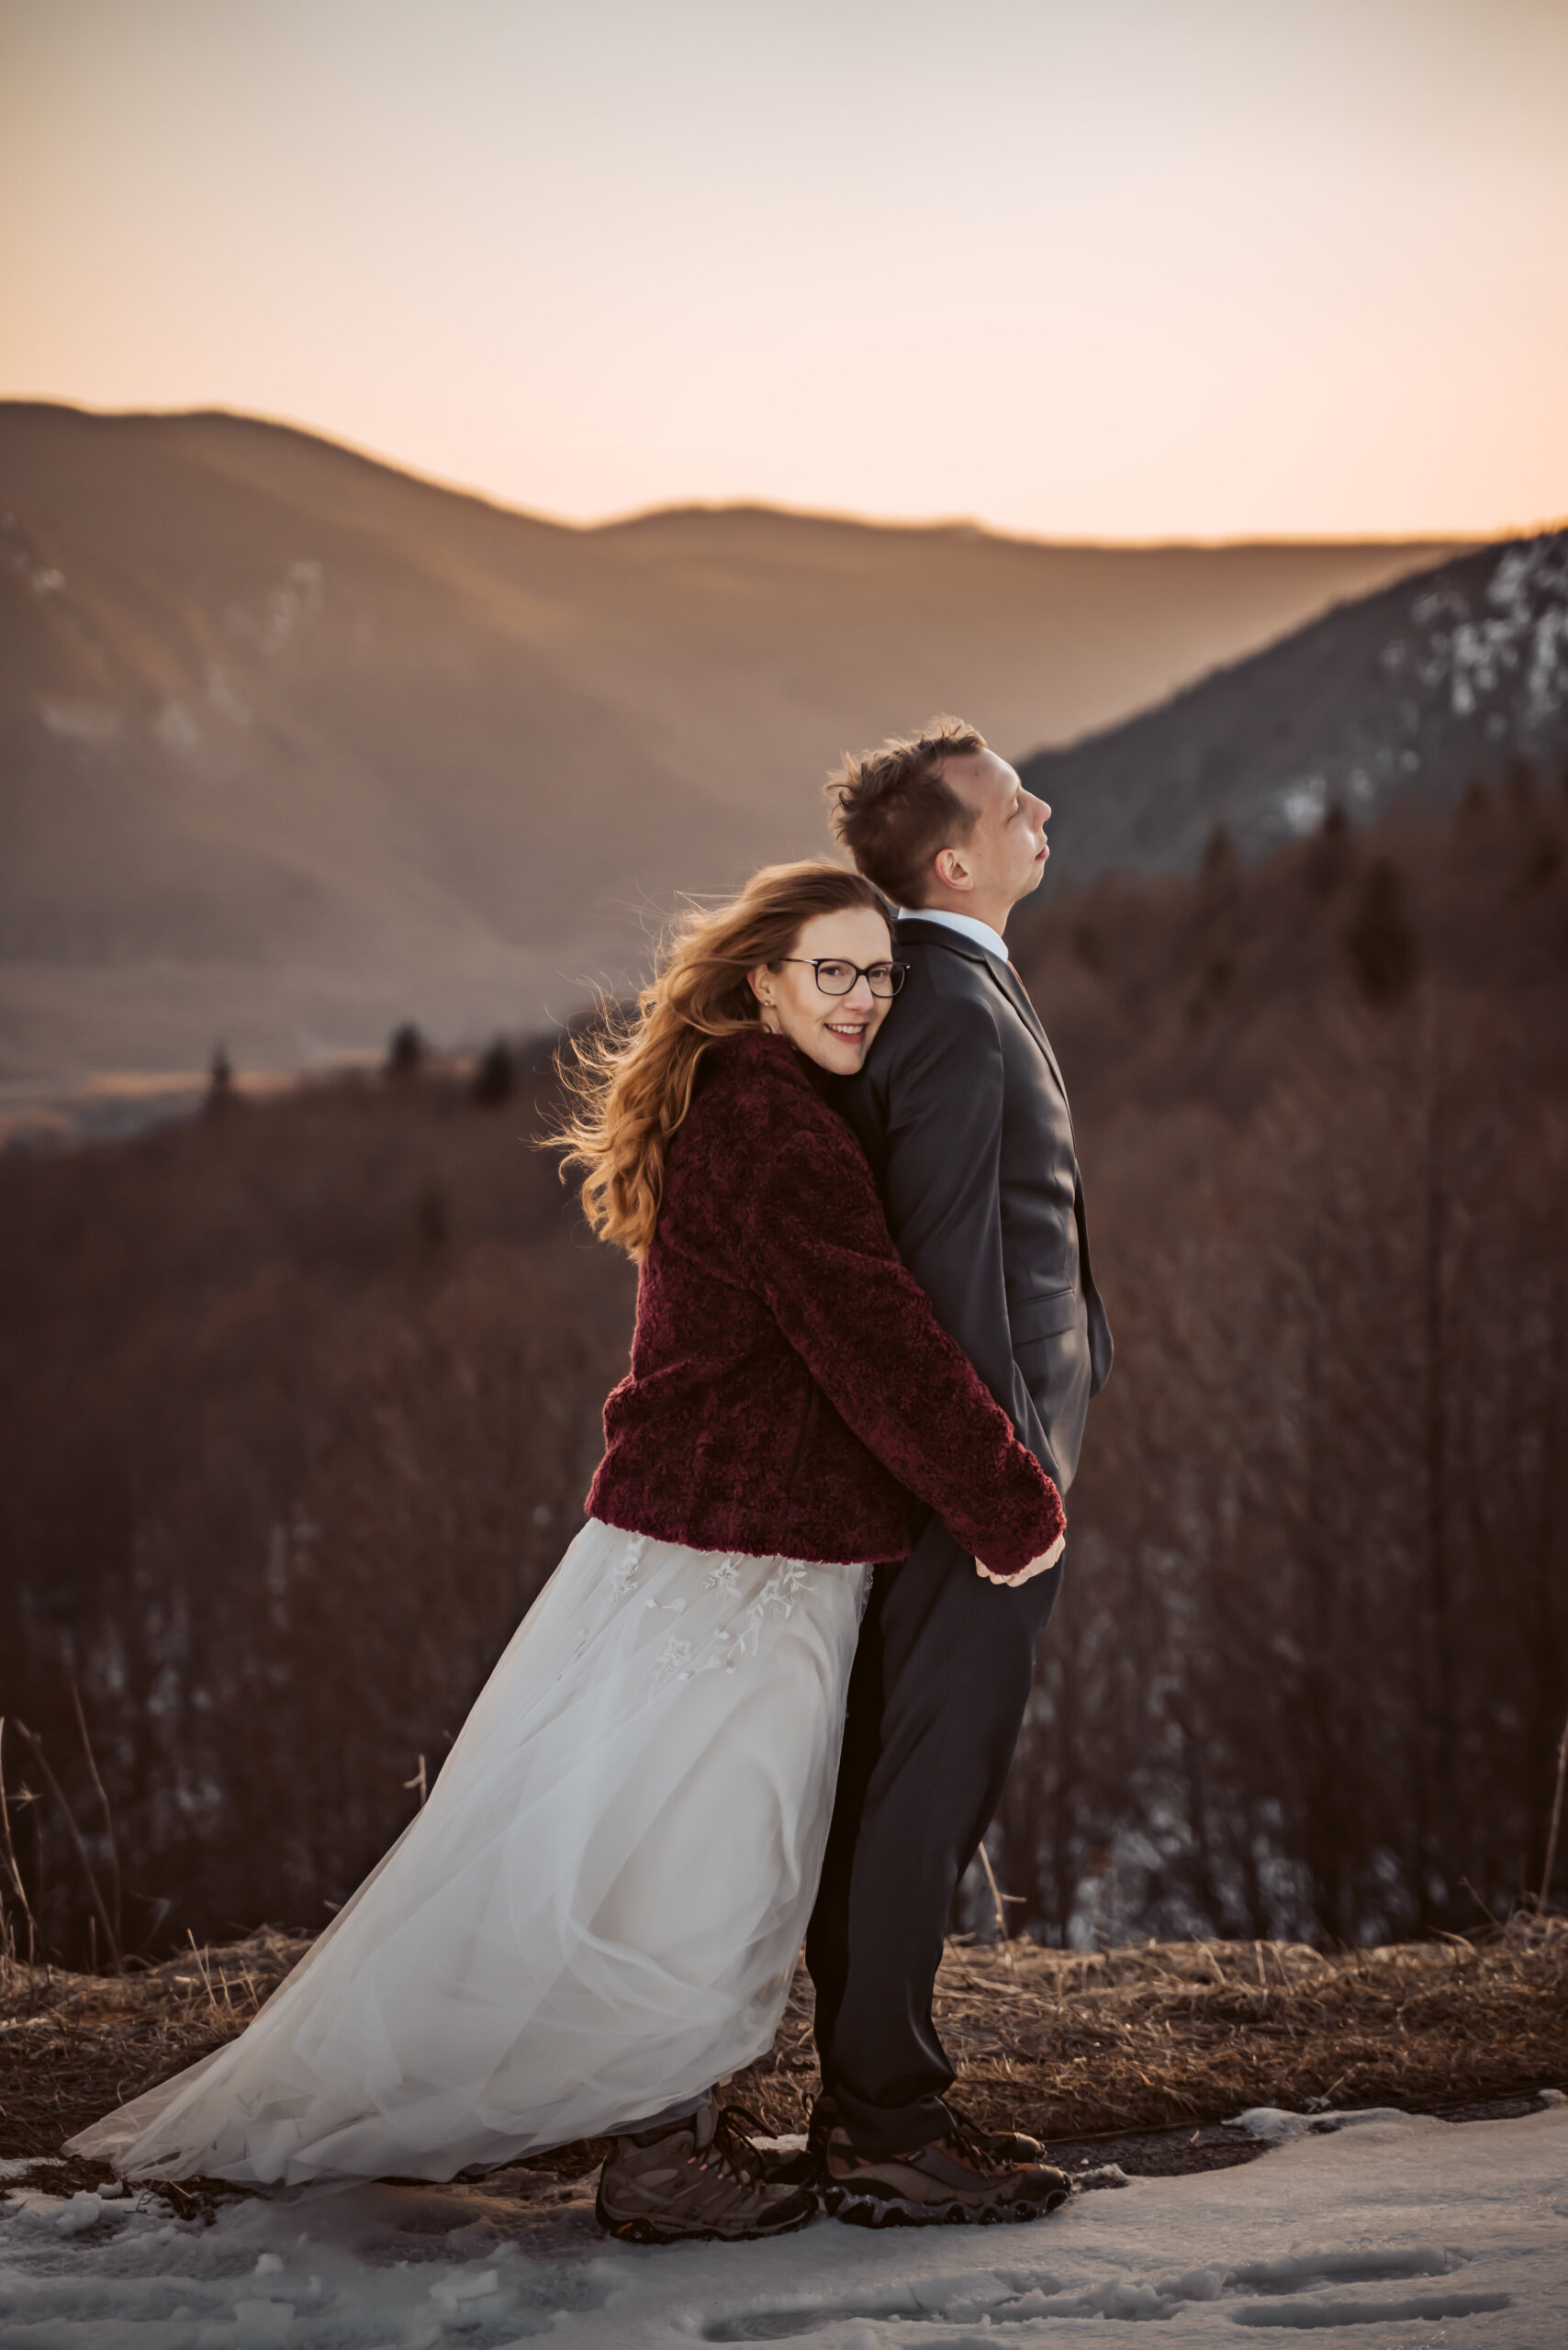  a bride holding her groom in the sunset in the mountains for their elopement day